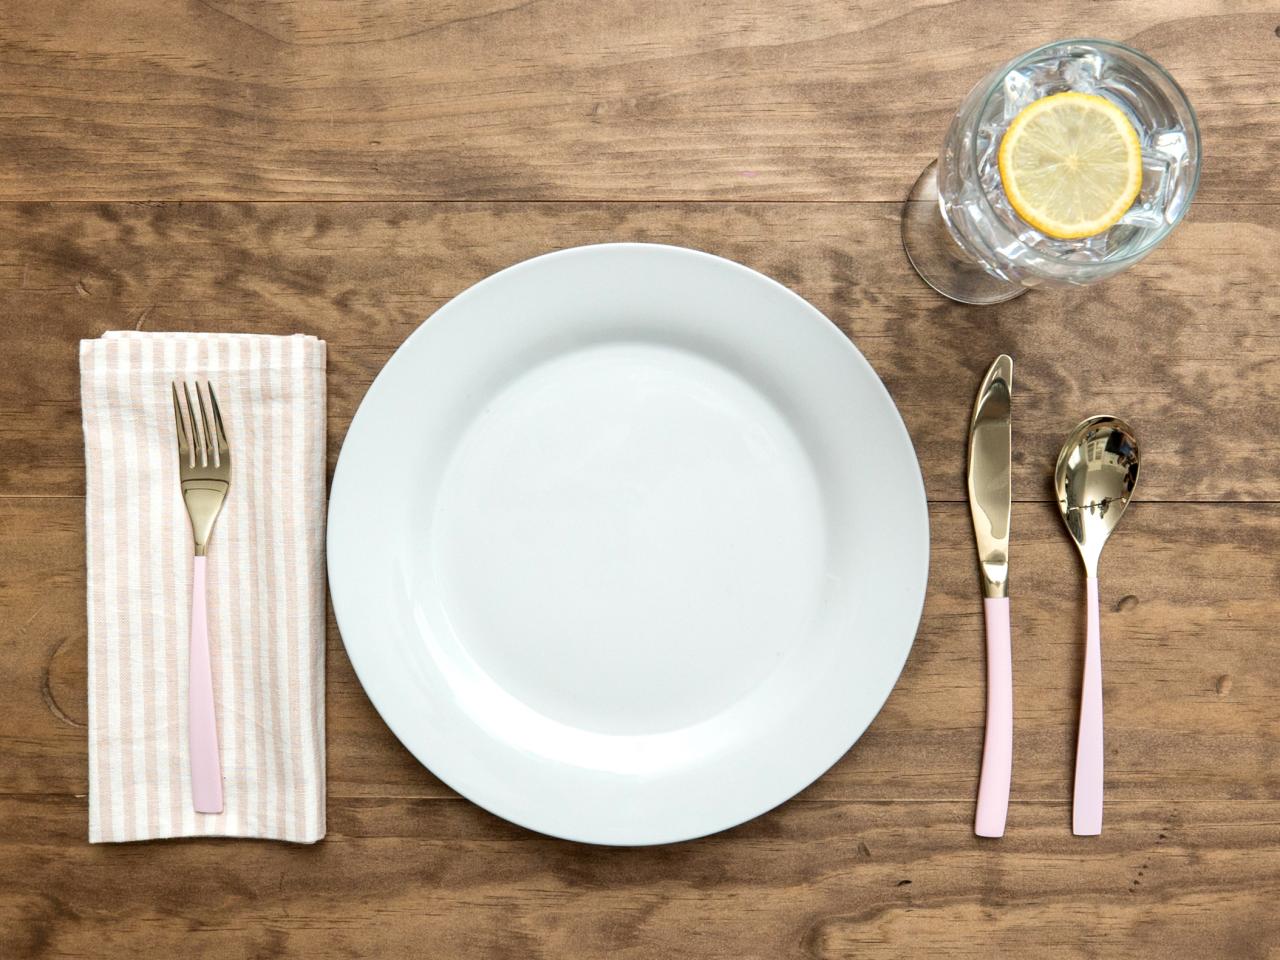 Where Does The Spoon Go In A Table Setting?